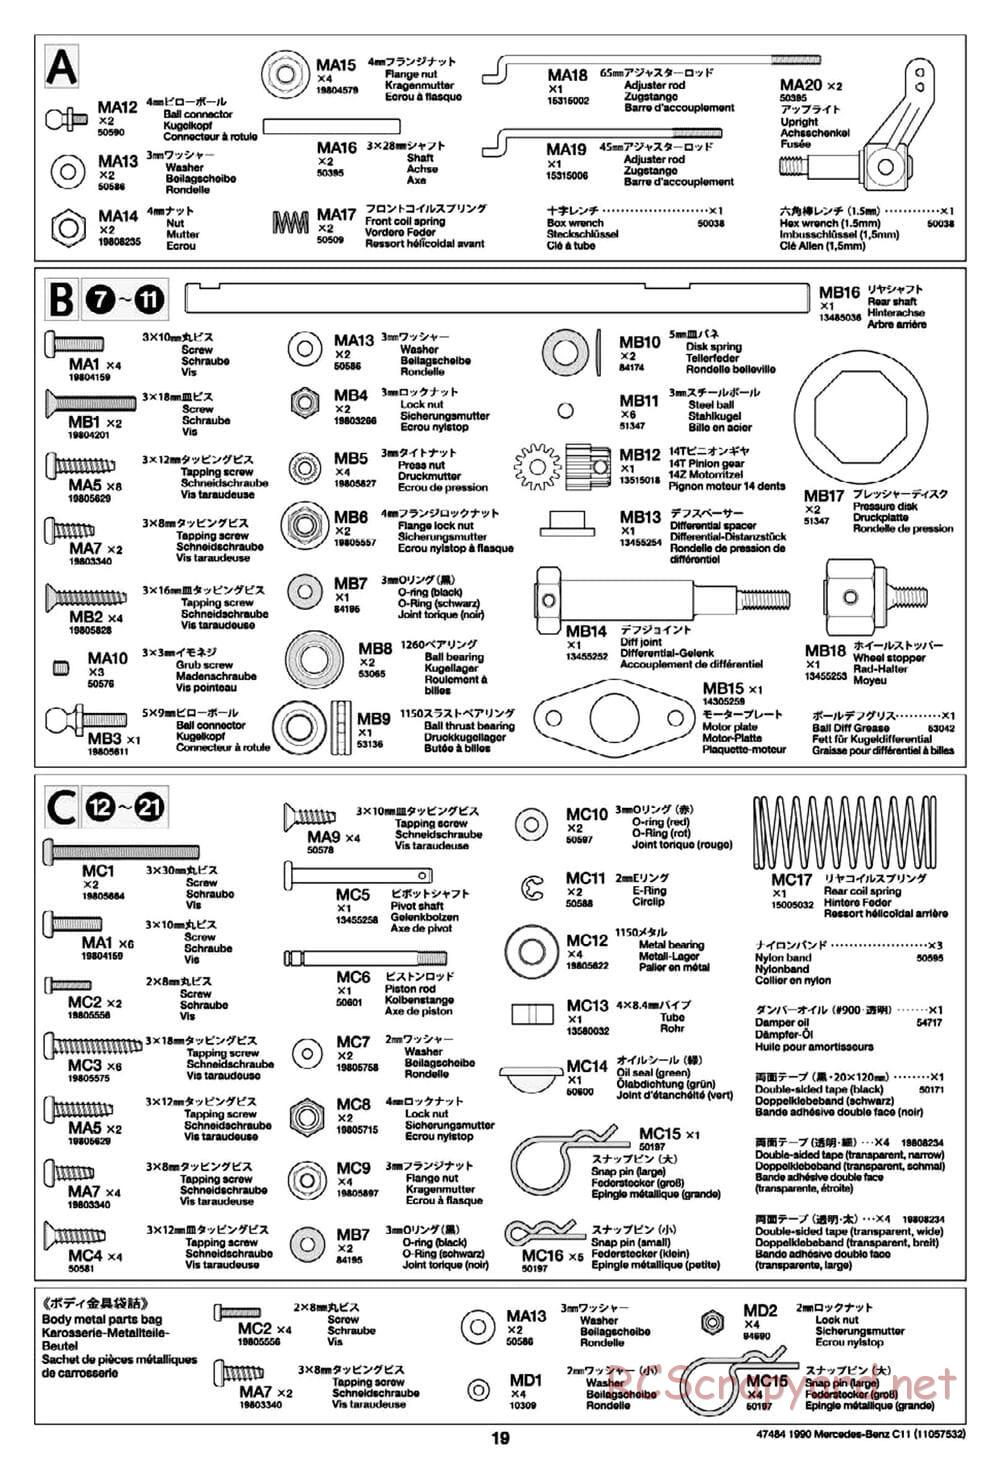 Tamiya - 1990 Mercedes-Benz C11 - Group-C Chassis - Manual - Page 19